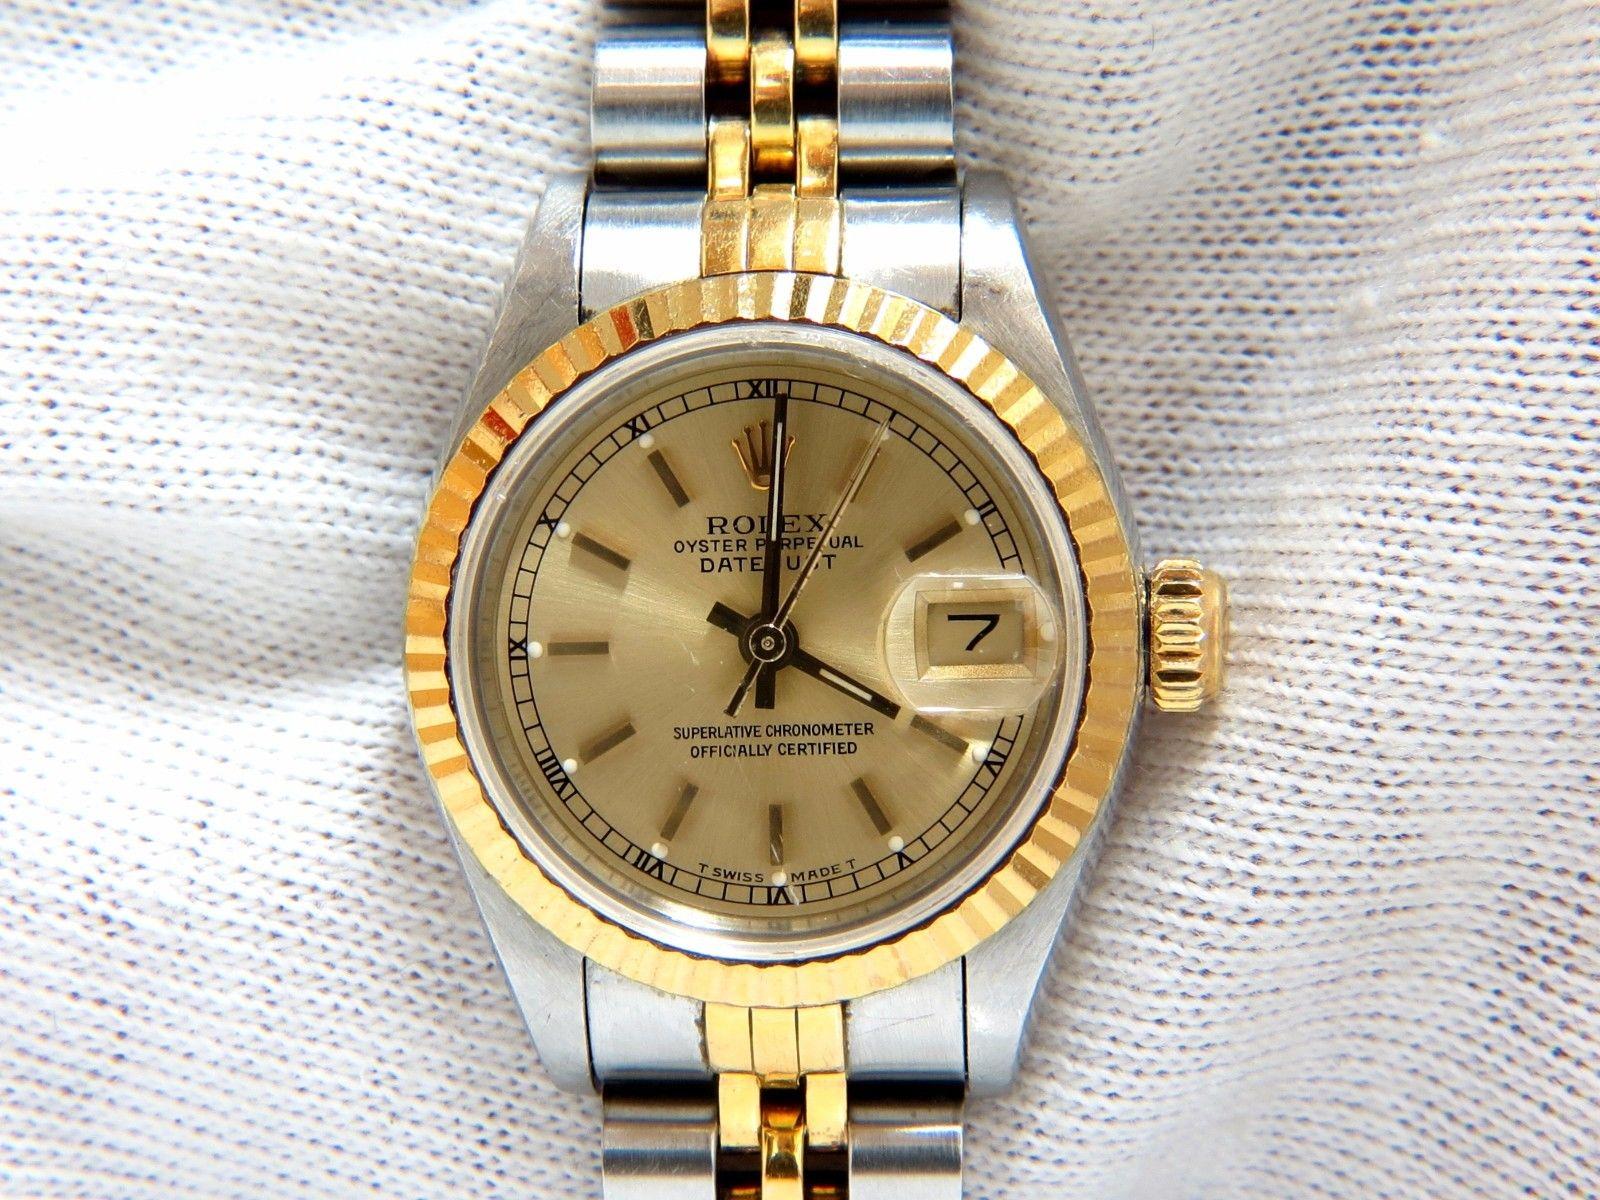 Ladies Two Toned Authentic Rolex Oyster DateJust.
Ref 69173 
Two Toned / Three Bodied Case.
Screw Down Case Back & Crown.
Fluted, 18kt. Gold bezel & Cyclops Lens
Baton Yellow gold hands.
18kt yellow gold & steel bracelet for 6.75 inch wrist.
Jubilee